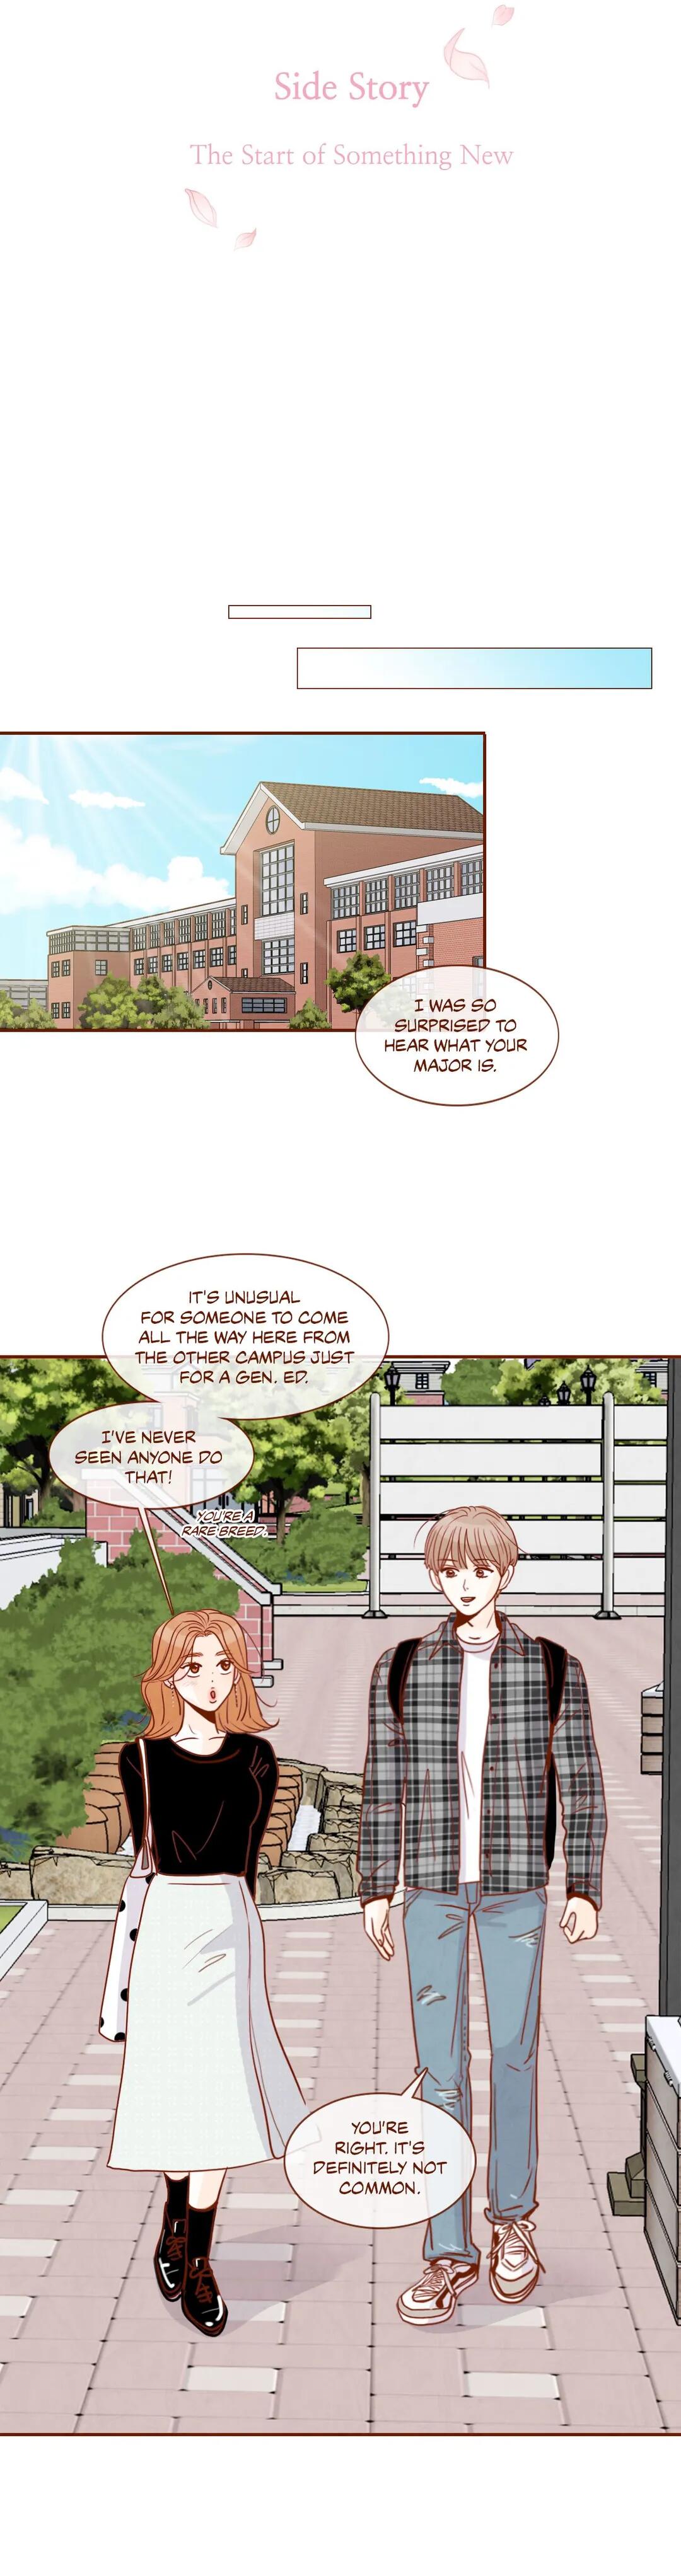 Secret Crush Chapter 98 - Side Story: The Start Of Something New - Picture 3